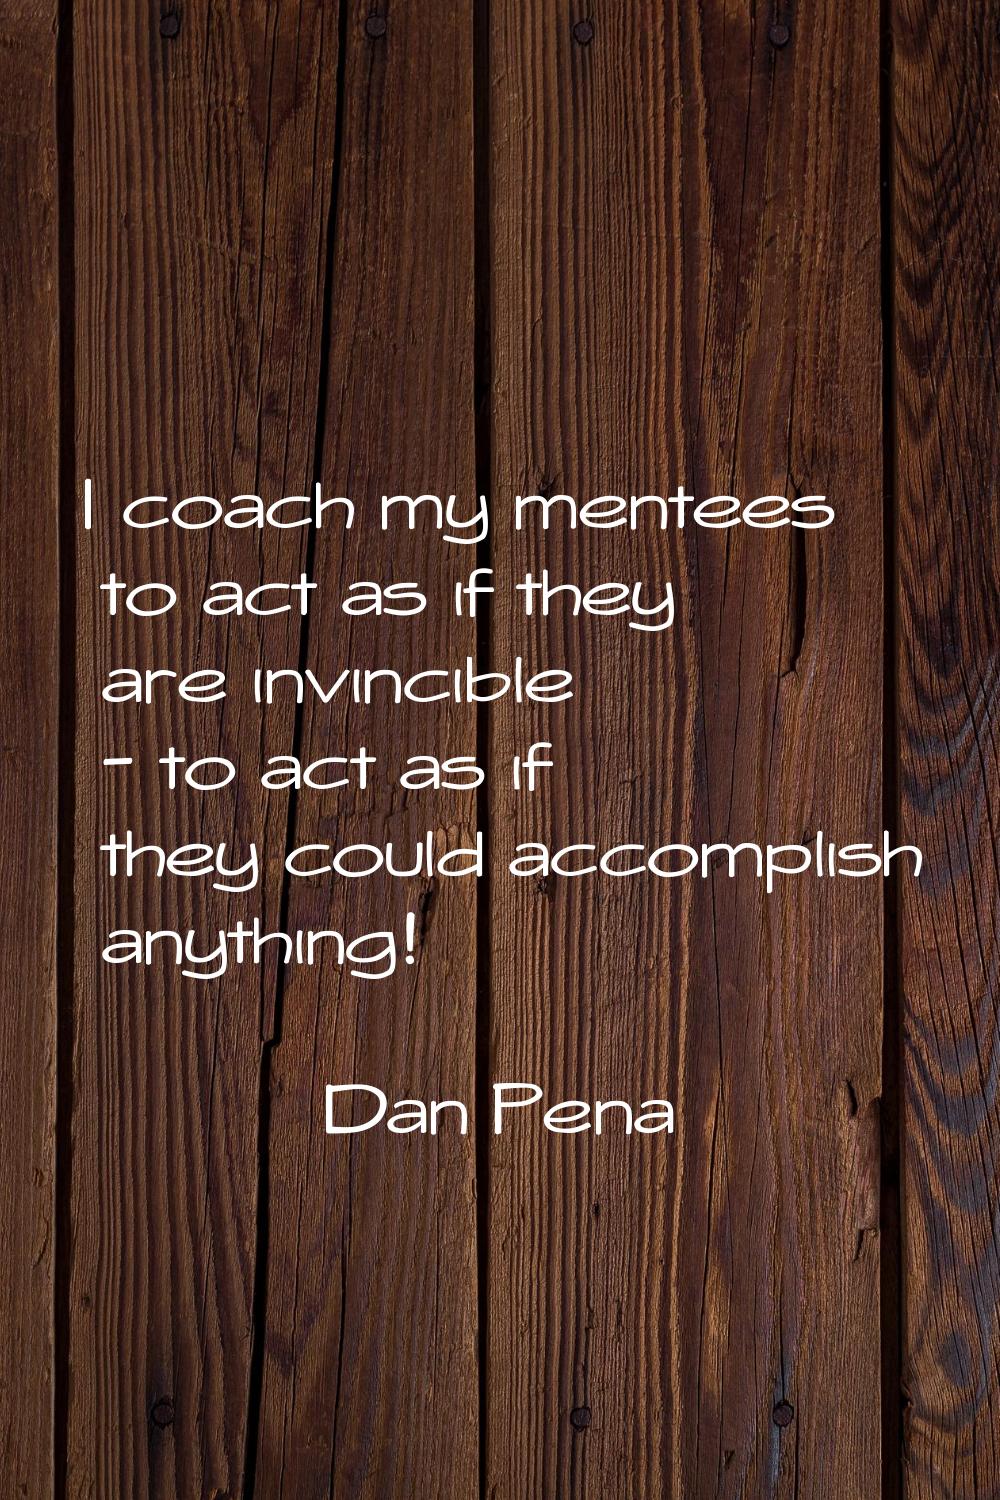 I coach my mentees to act as if they are invincible - to act as if they could accomplish anything!